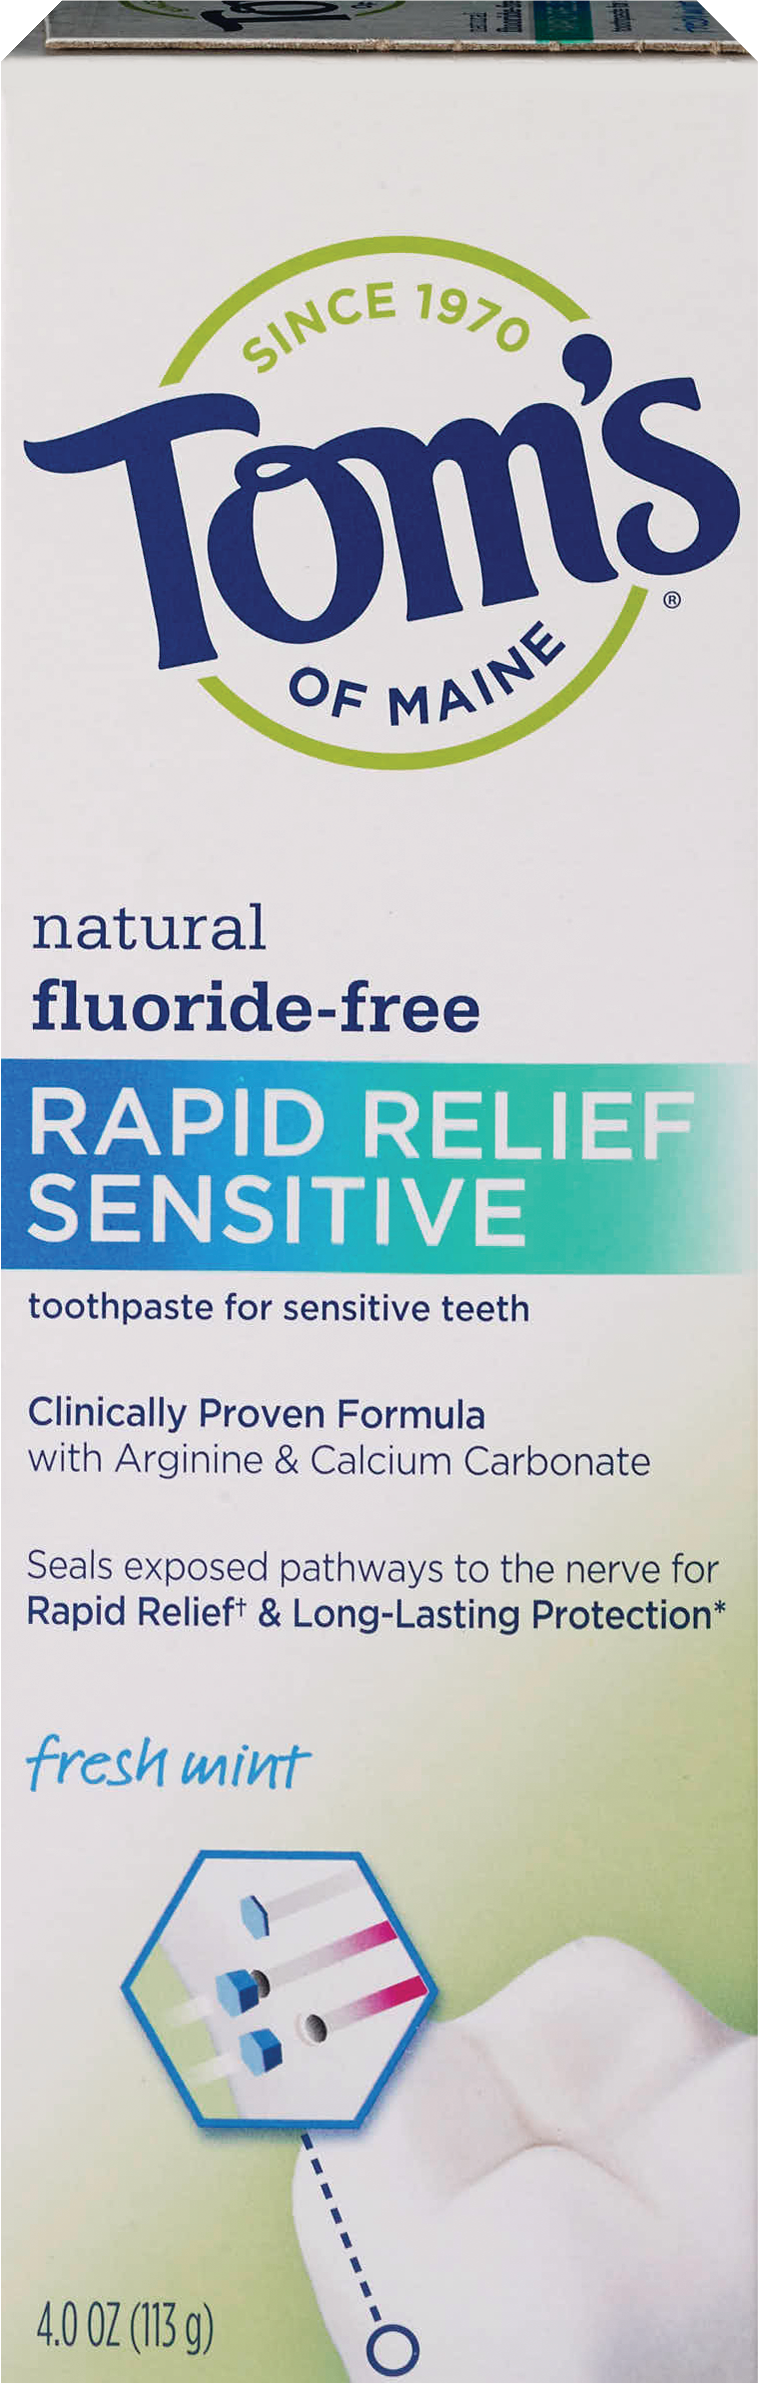 Tom's Of Maine Rapid Relief Sensitive Natural Fluoride-Free Toothpaste, Fresh Mint